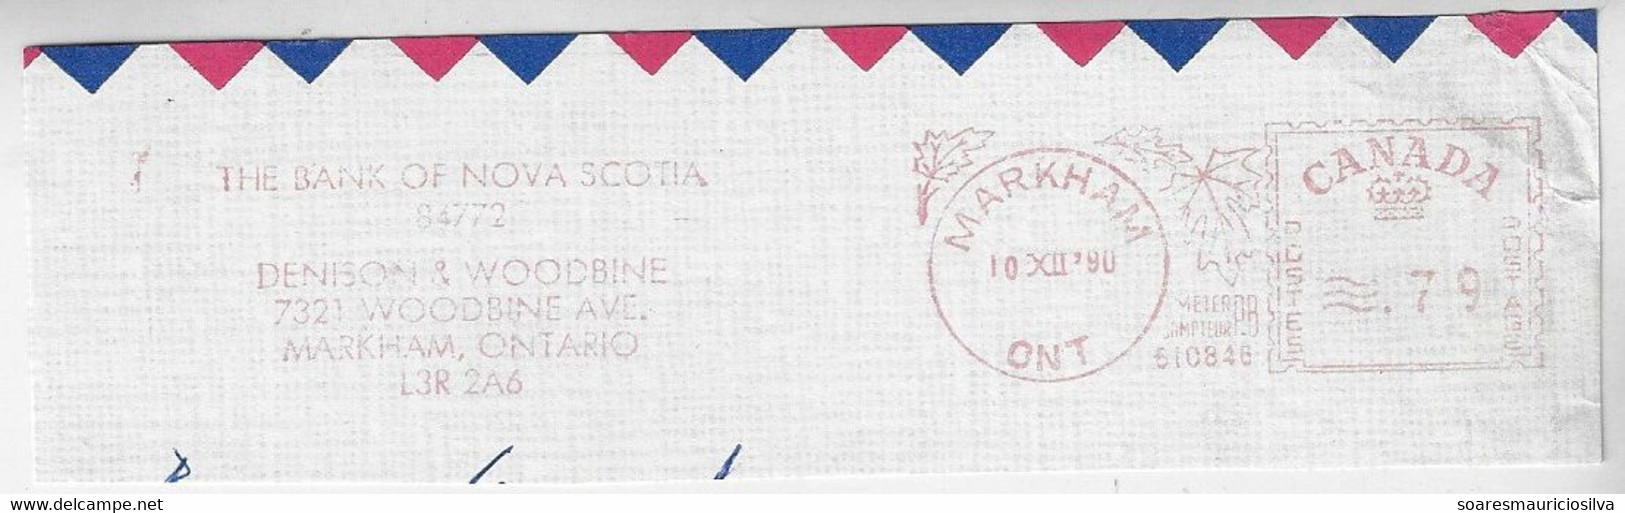 Canada 1990 Fragment Cover Meter Stamp Pitney Bowes 5300 Maple Leaf Ornaments Slogan Bank Of Nova Scotia In Markham - Covers & Documents